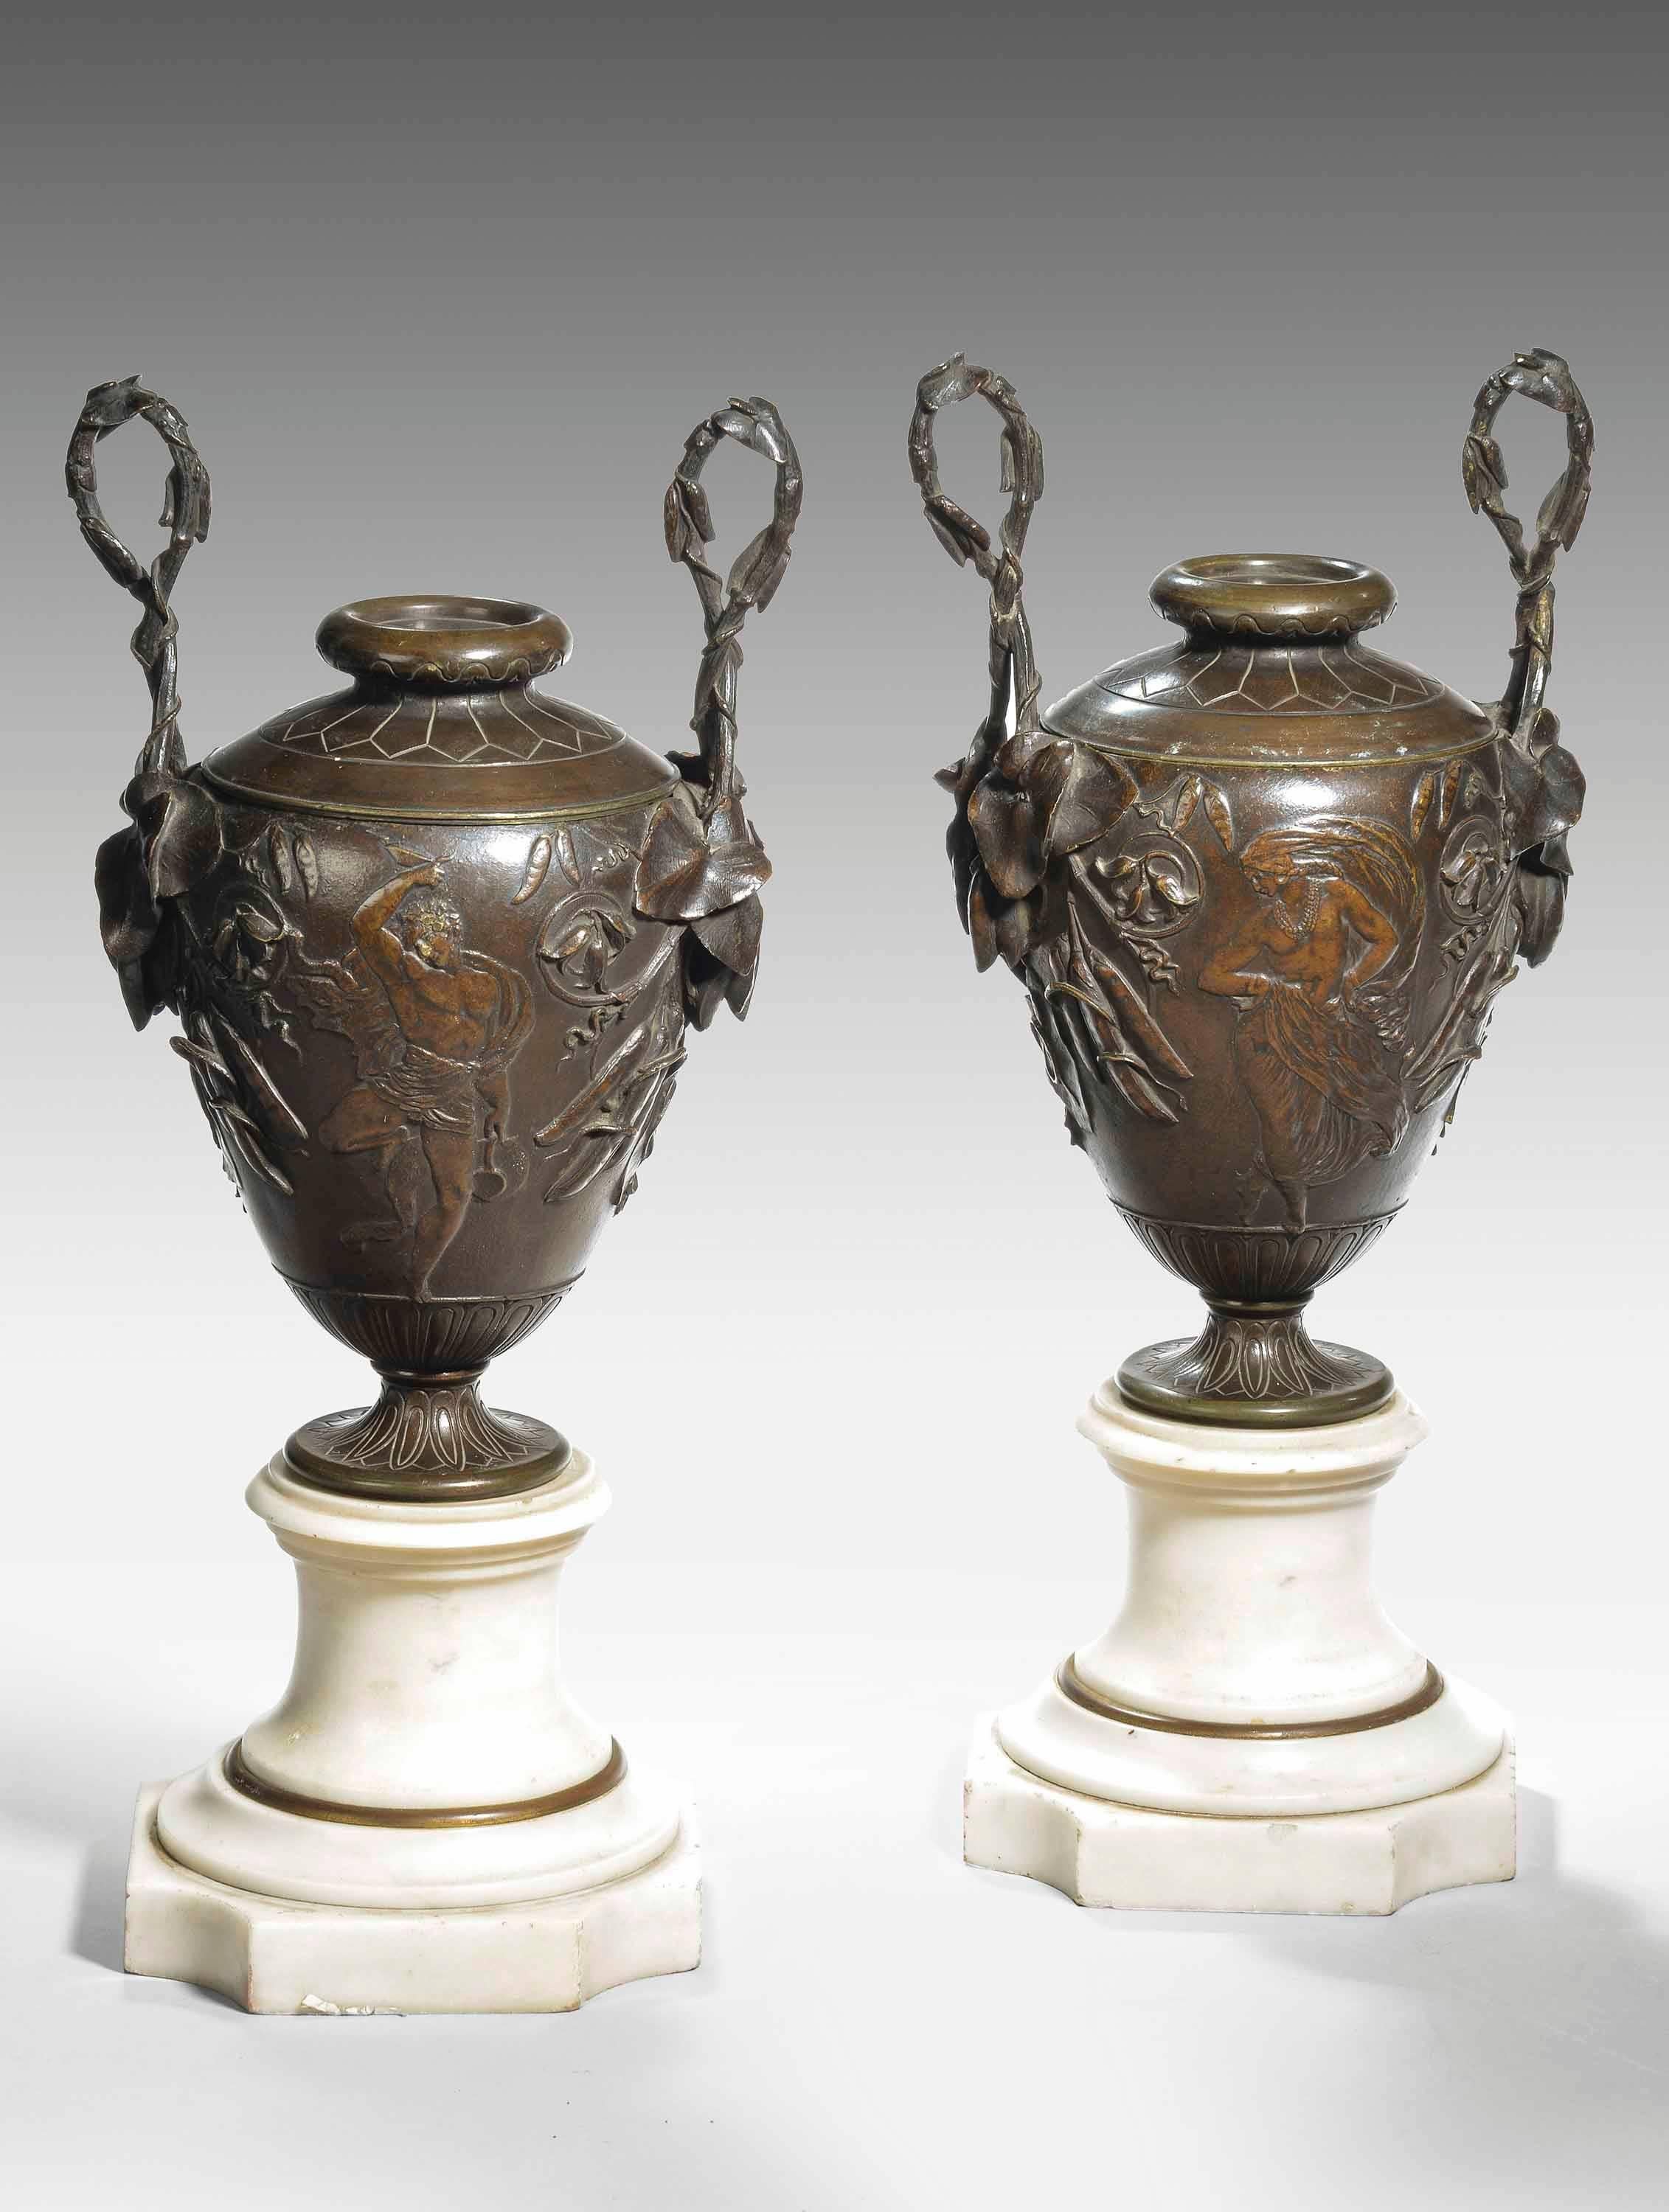 A fine pair of patinated bronze and marble urn shaped vases. The bodies with neoclassic figures and foliage. The handles with lily leaves and cementing twig tops. Reversible lids. Excellent overall condition and patina.